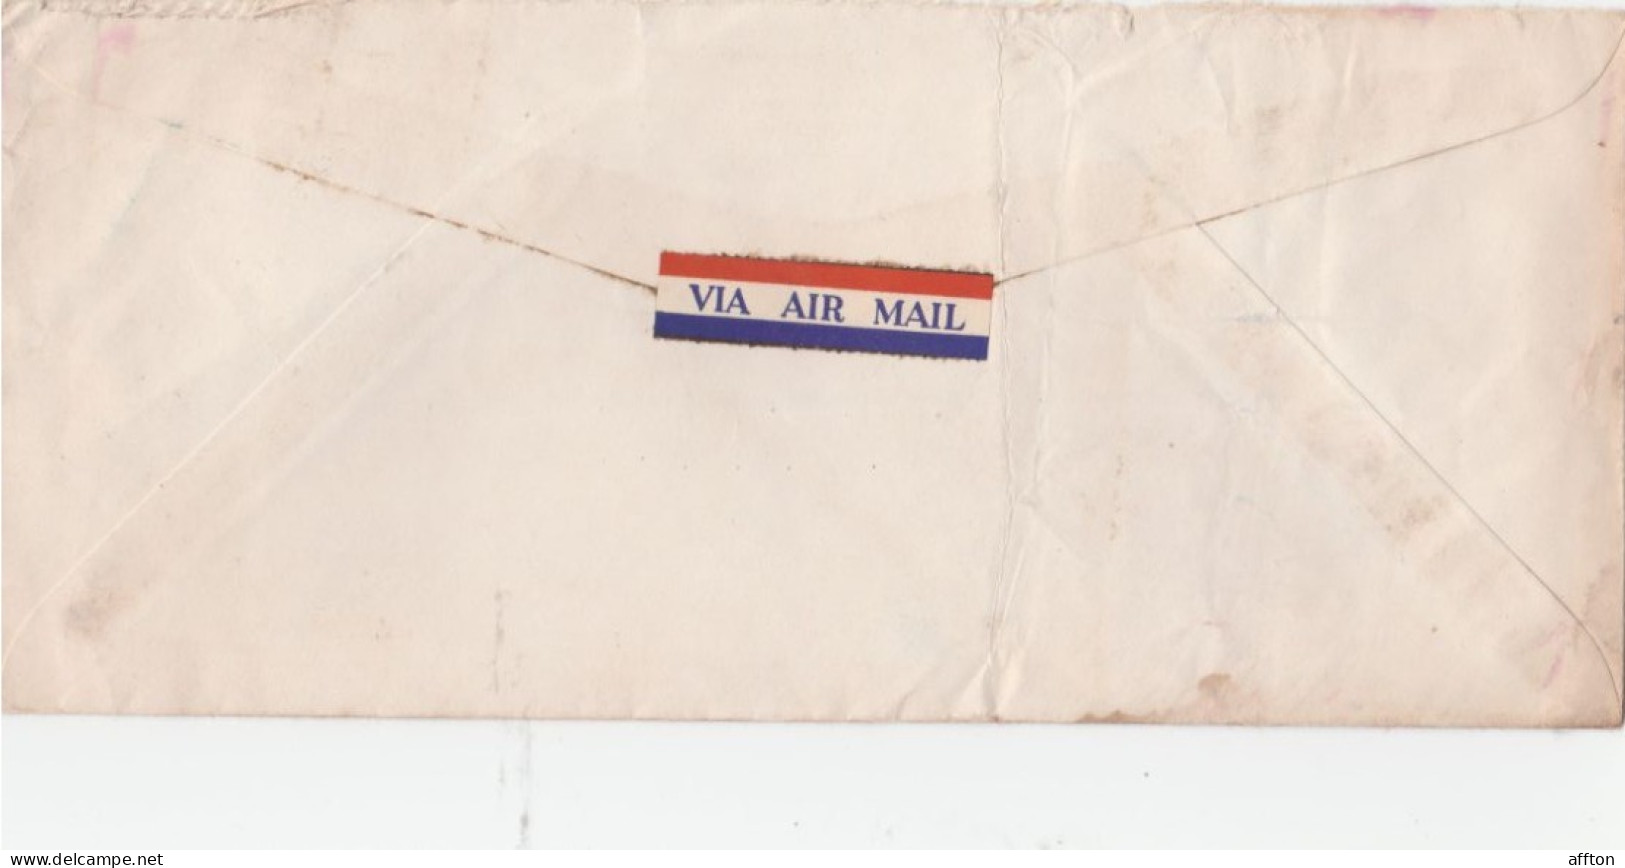 Cuba Old Cover Mailed - Lettres & Documents